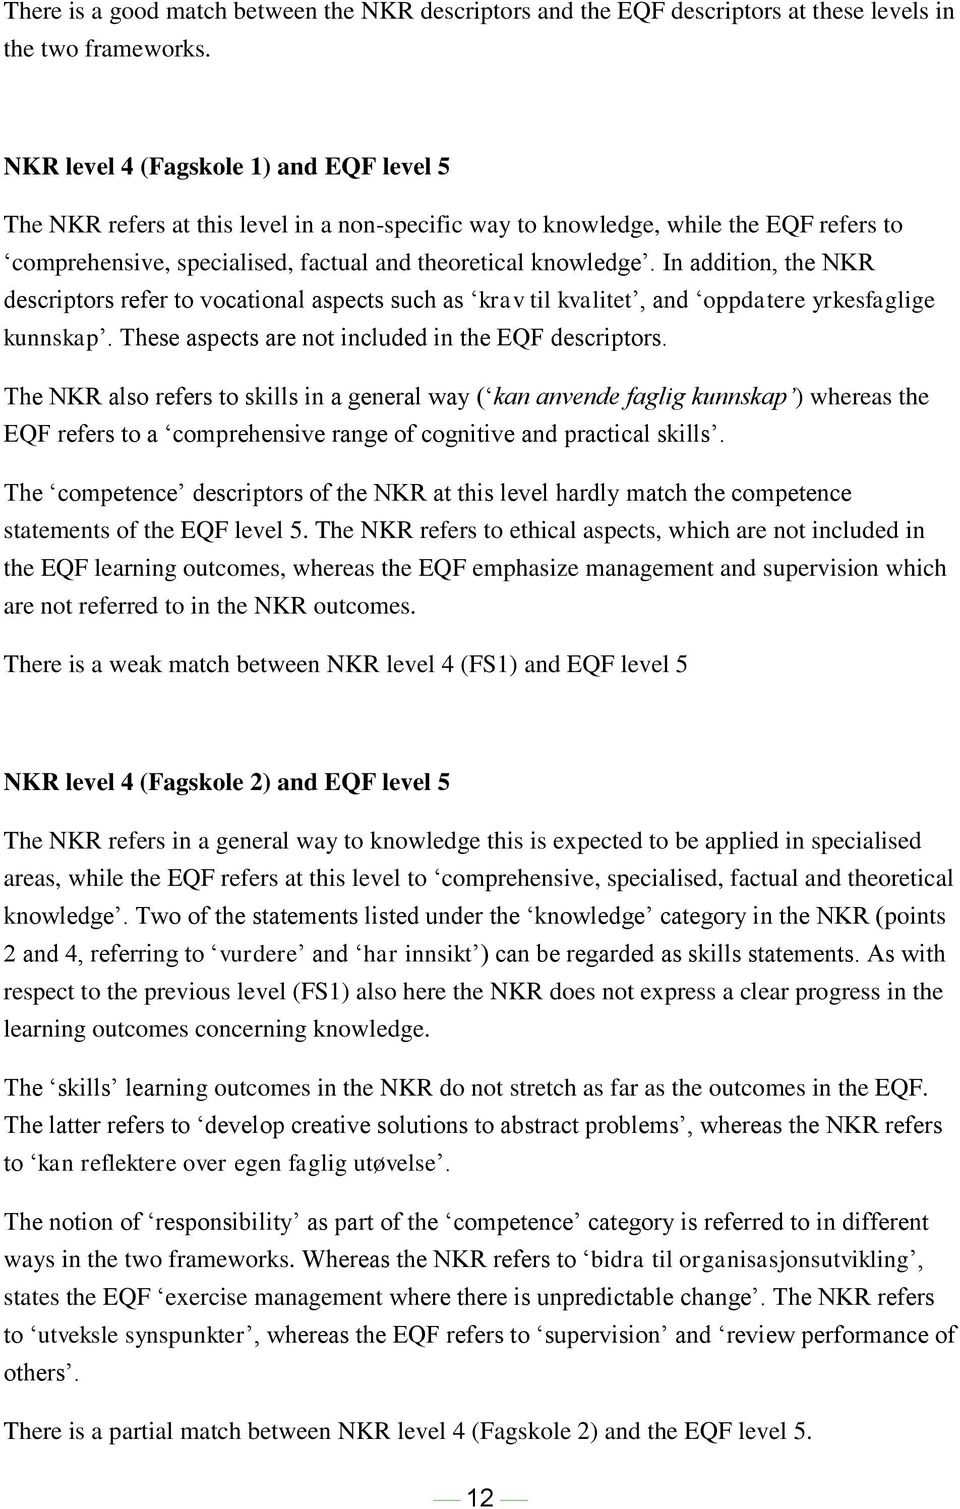 In addition, the NKR descriptors refer to vocational aspects such as krav til kvalitet, and oppdatere yrkesfaglige kunnskap. These aspects are not included in the EQF descriptors.